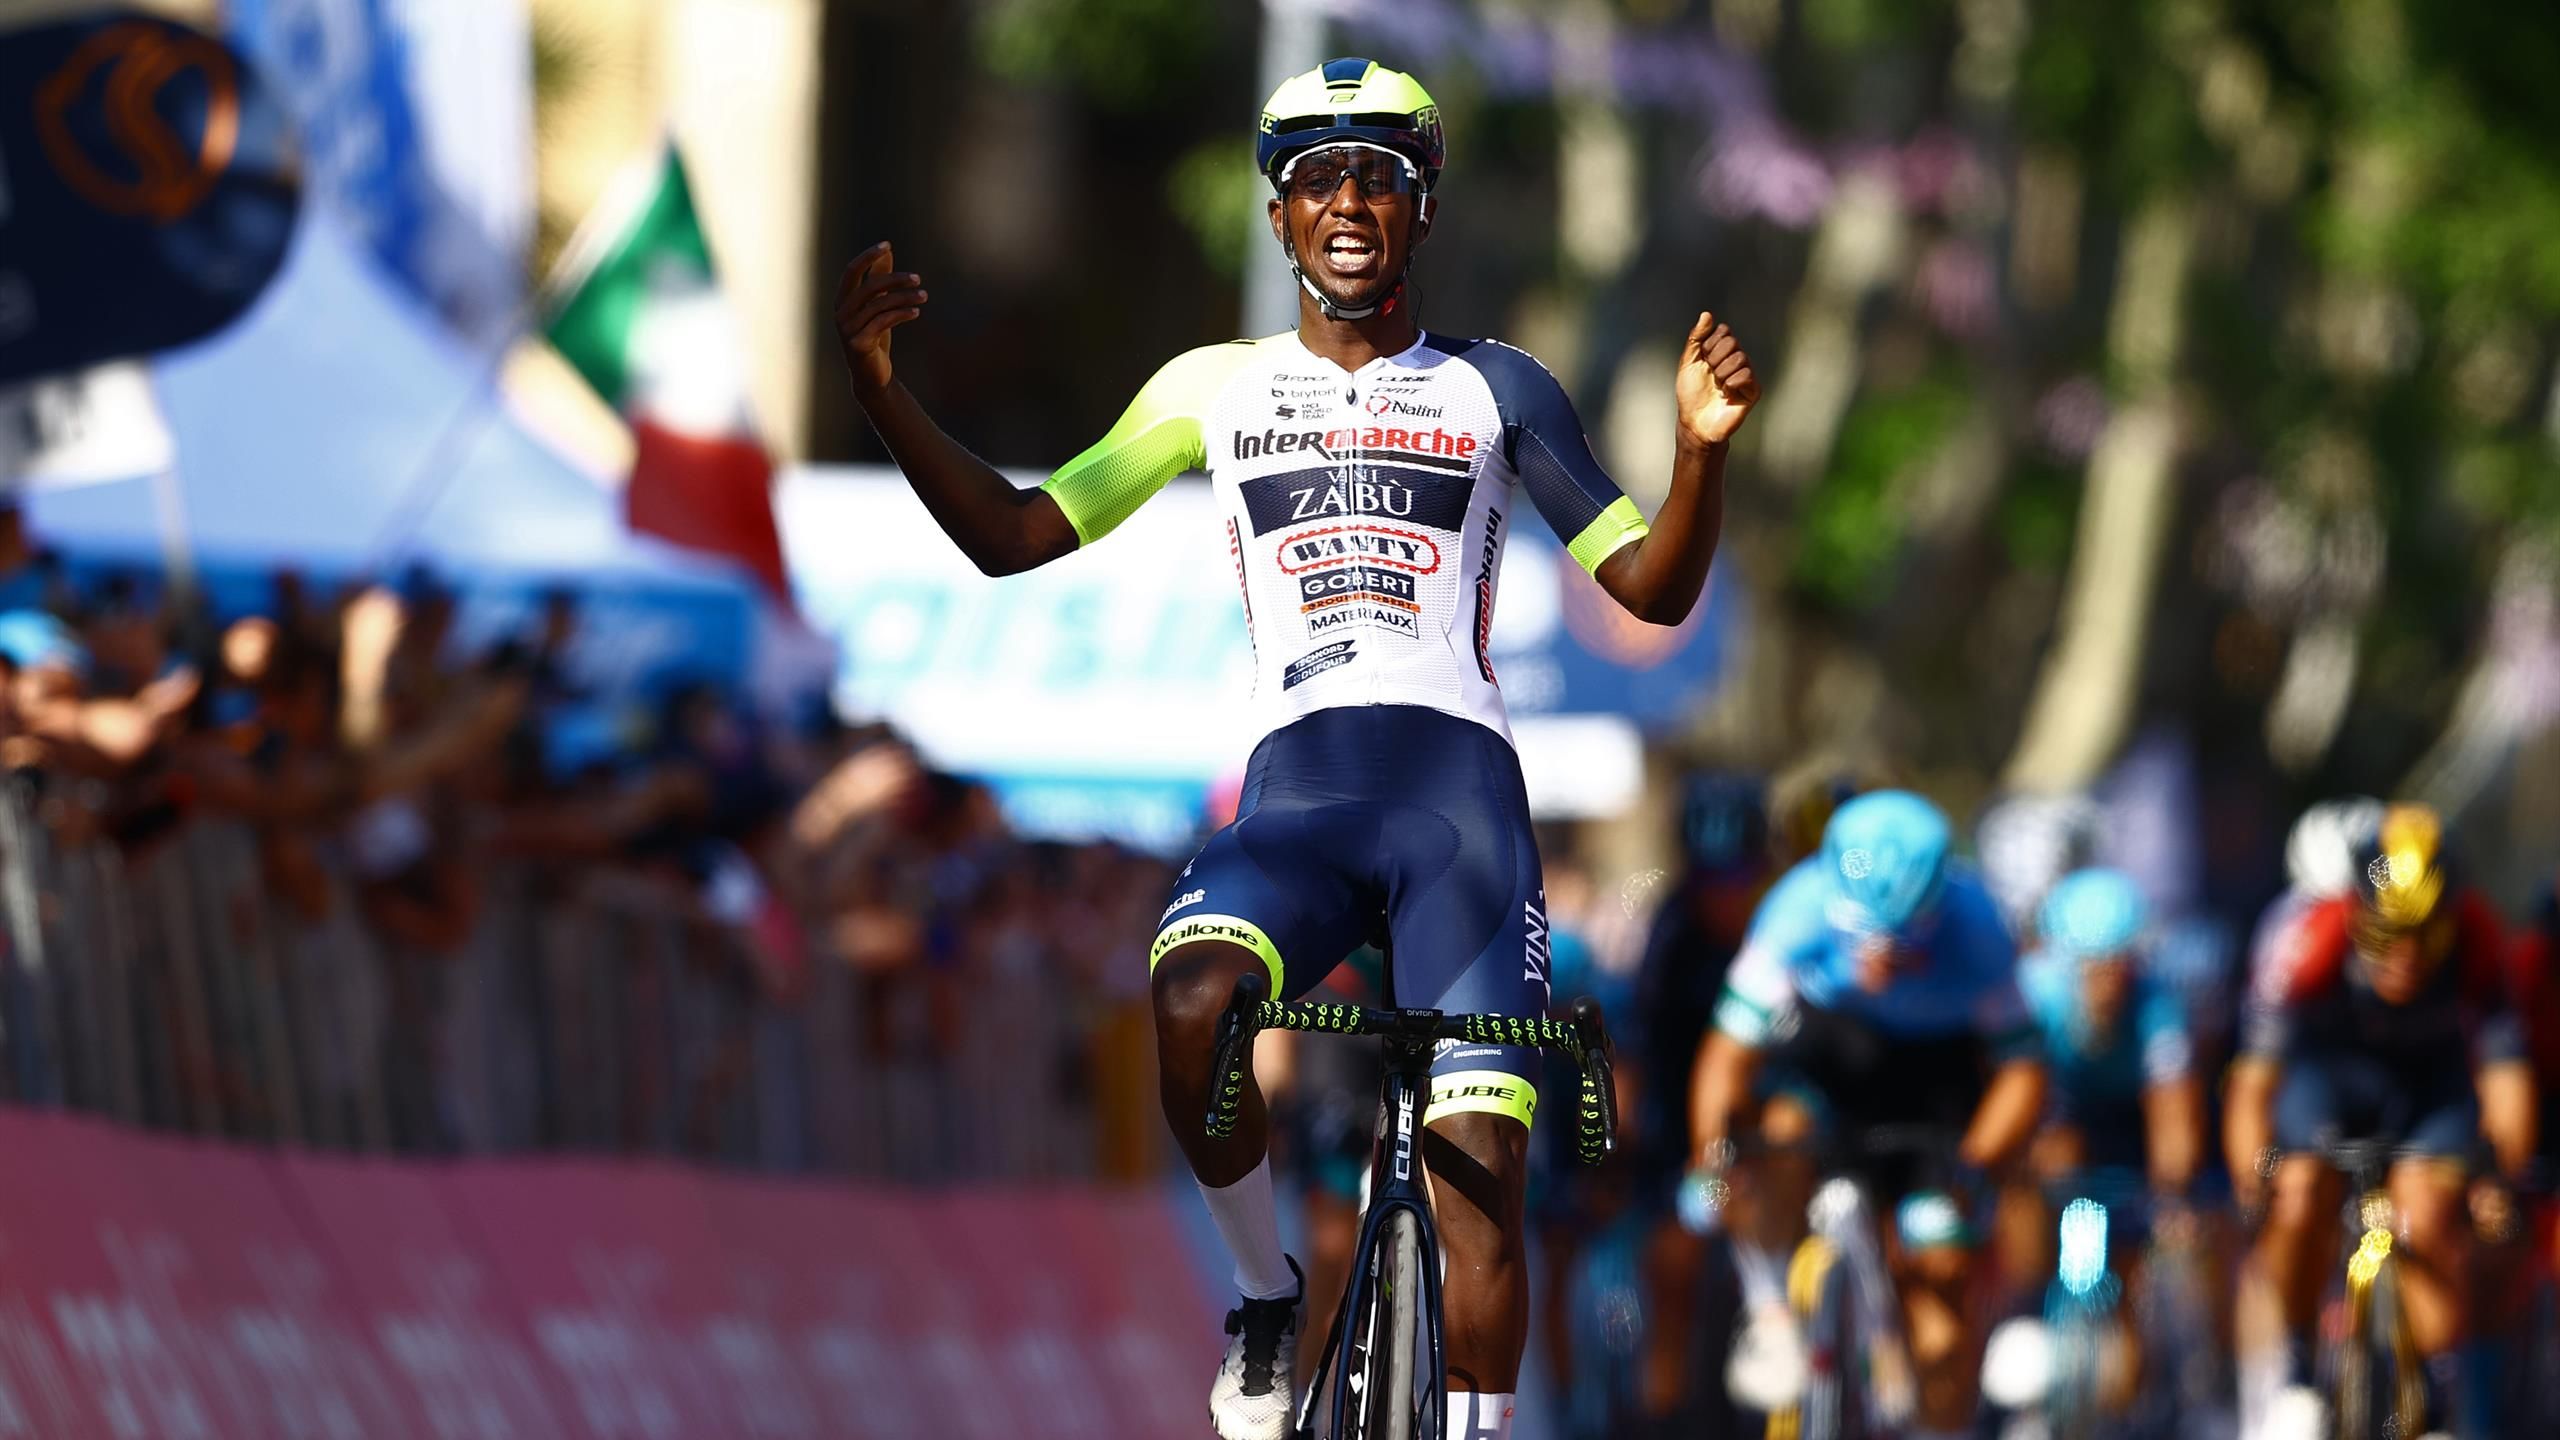 Giro dItalia 2022 Stage 10 as it happened - History made as Biniam Girmay outlasts Mathieu van der Poel in epic sprint